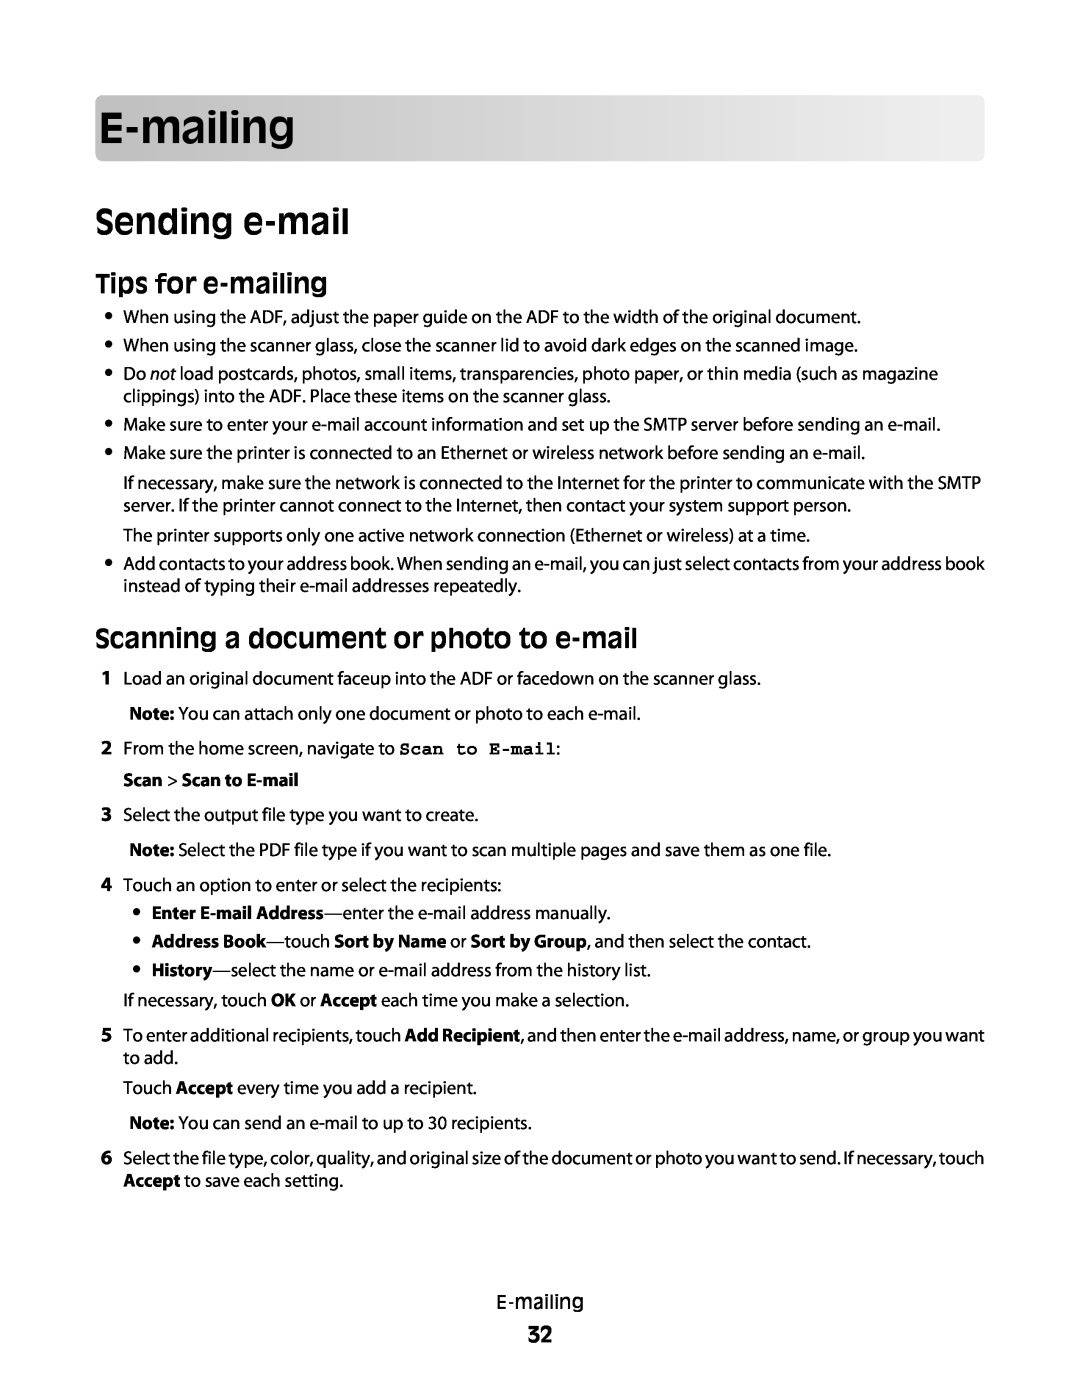 Lexmark S600 manual E-mailing, Sending e-mail, Tips for e-mailing, Scanning a document or photo to e-mail 